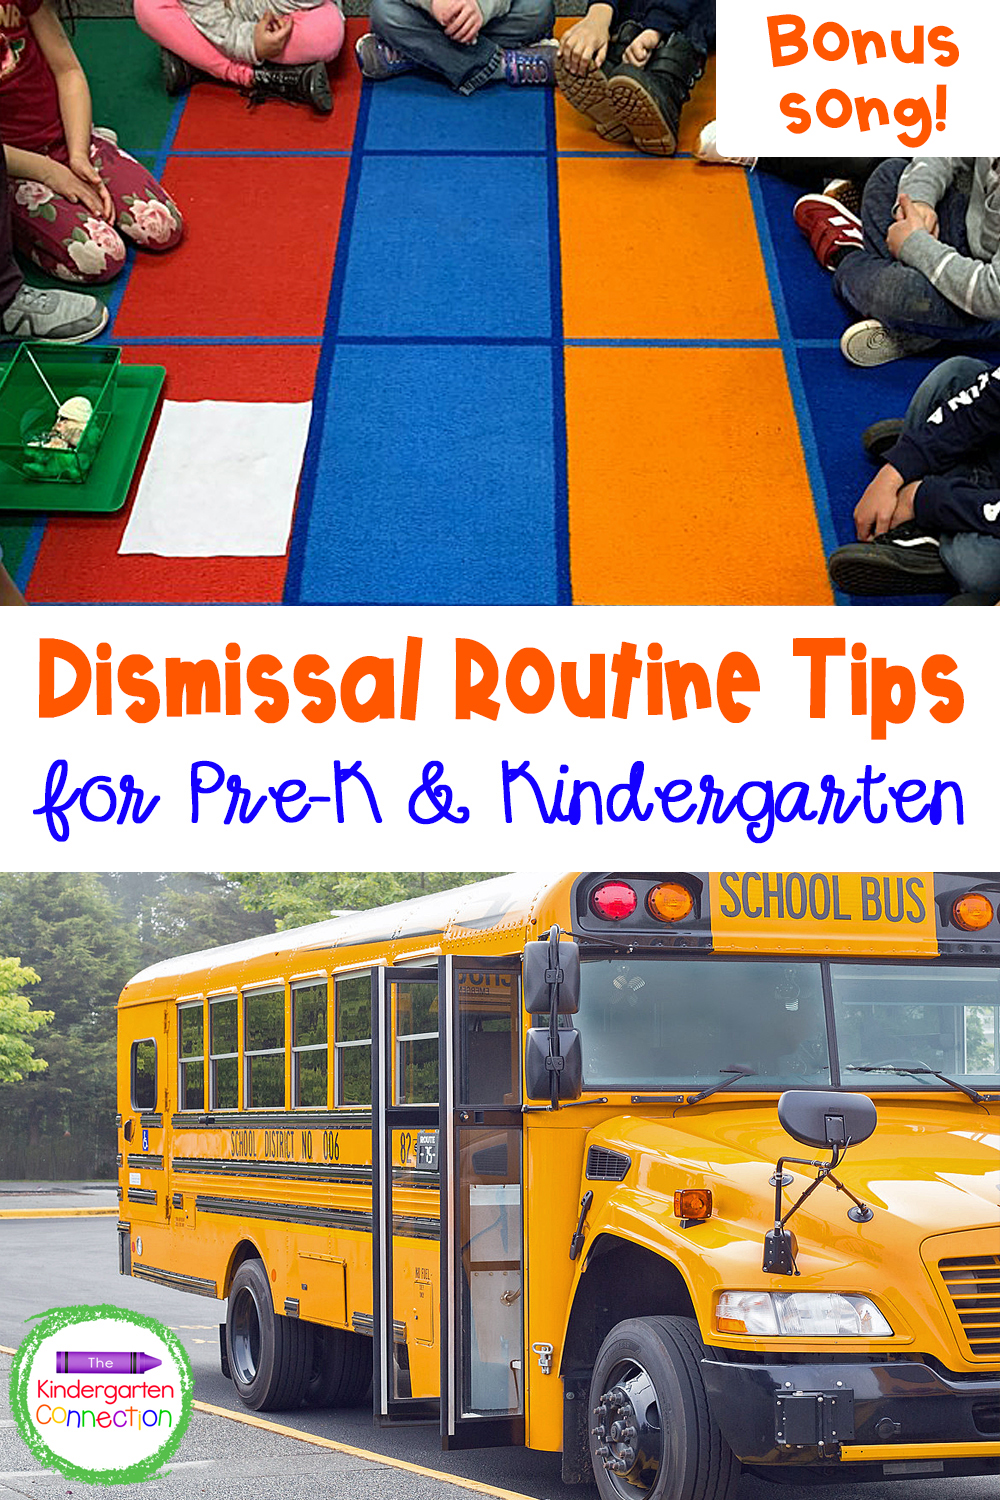 These 3 tips for Pre-K and Kindergarten dismissal routines will be sure to leave you feeling less stressed at the end of the day!